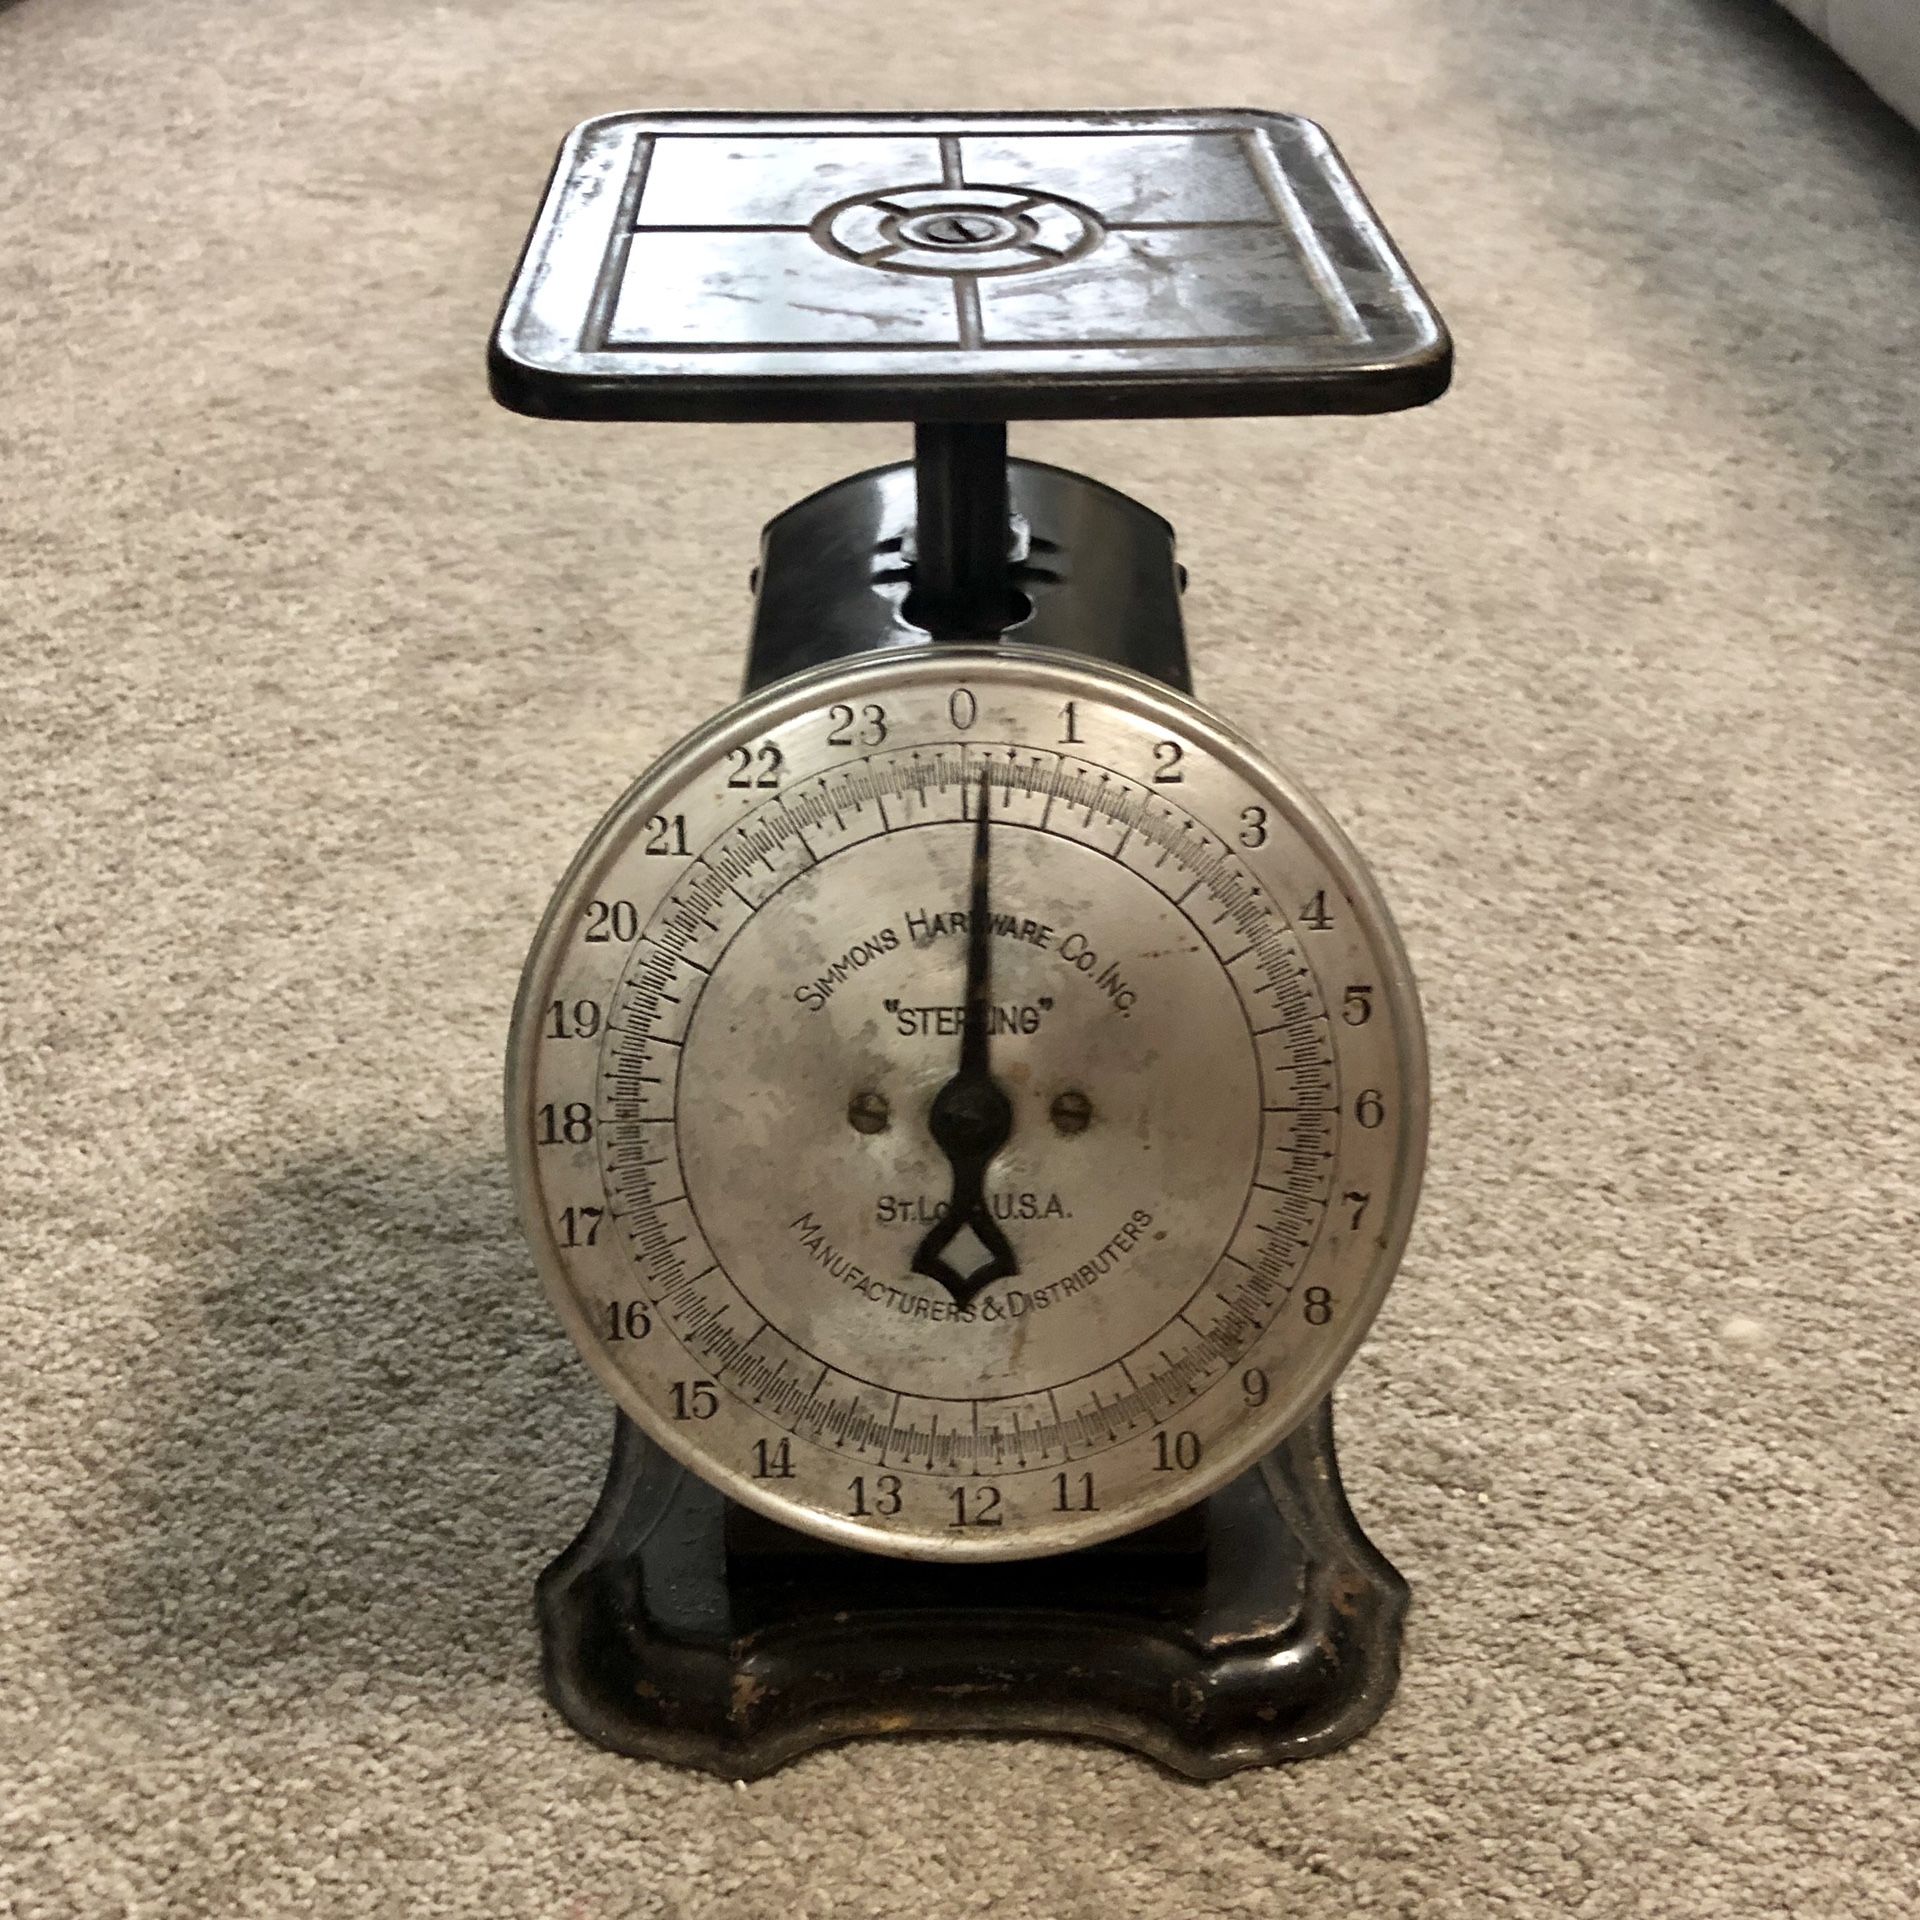 Simmons Hardware Co Sterling scale